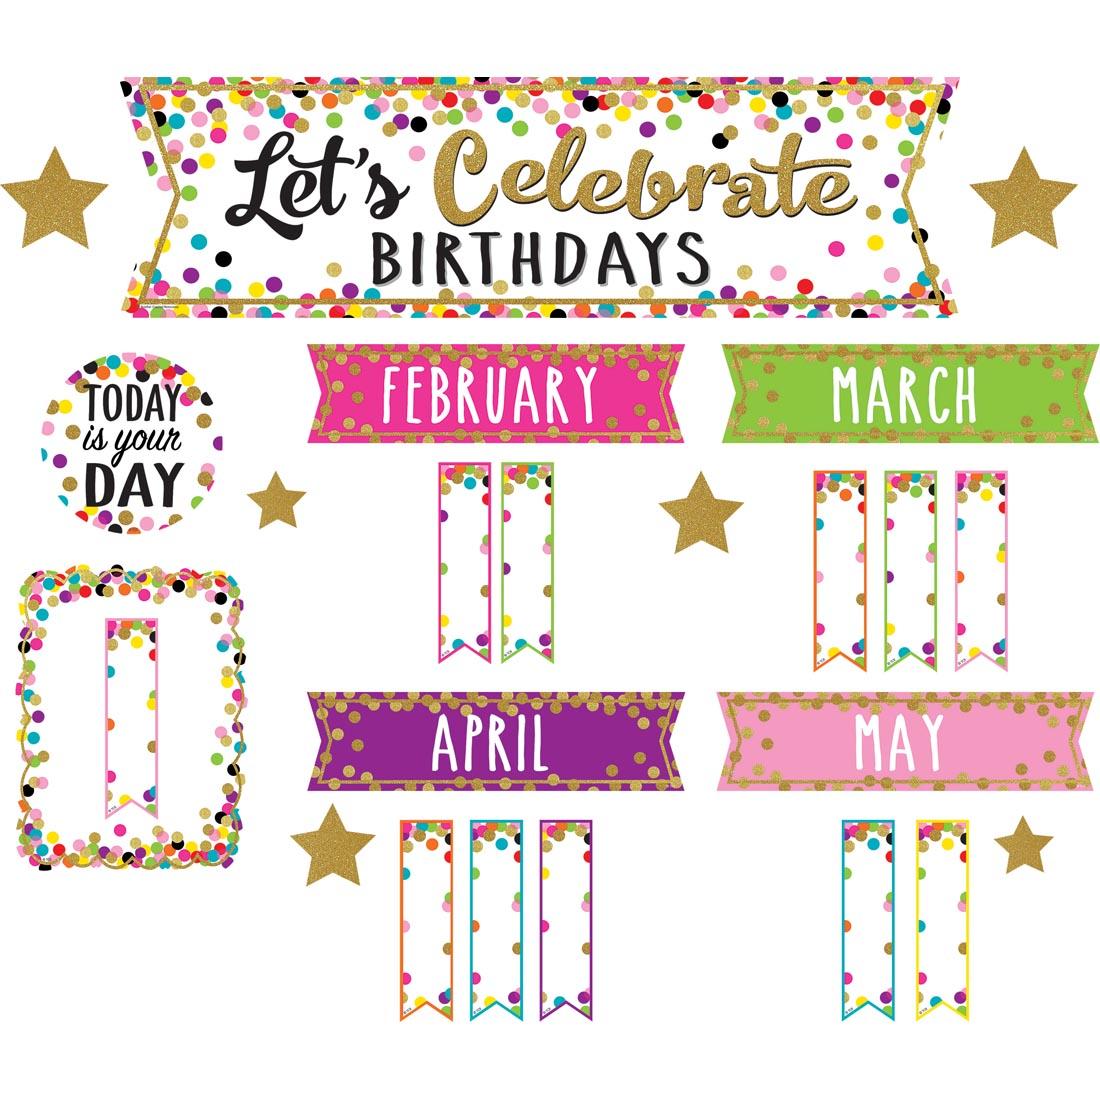 Let's Celebrate Birthdays Mini Bulletin Board Set from the Confetti collection by Teacher Created Resources